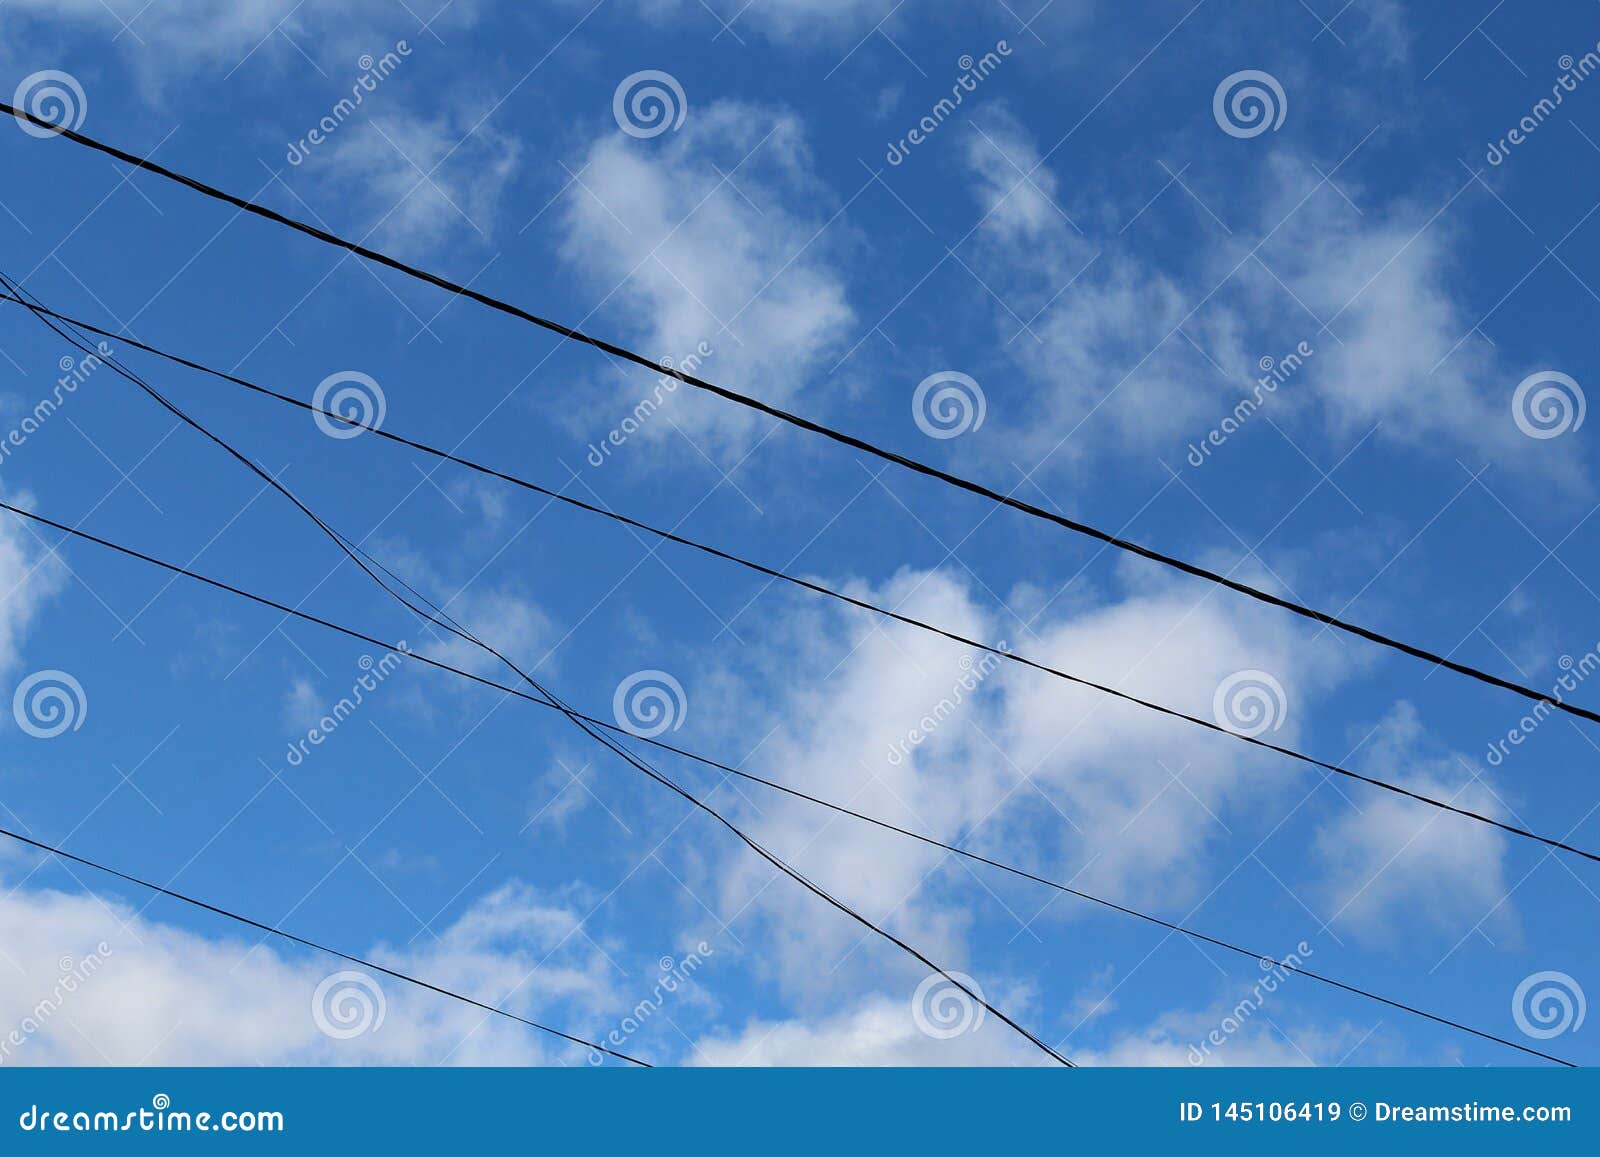 blue sky with white clouds and electric transmision wires, in the daytime.